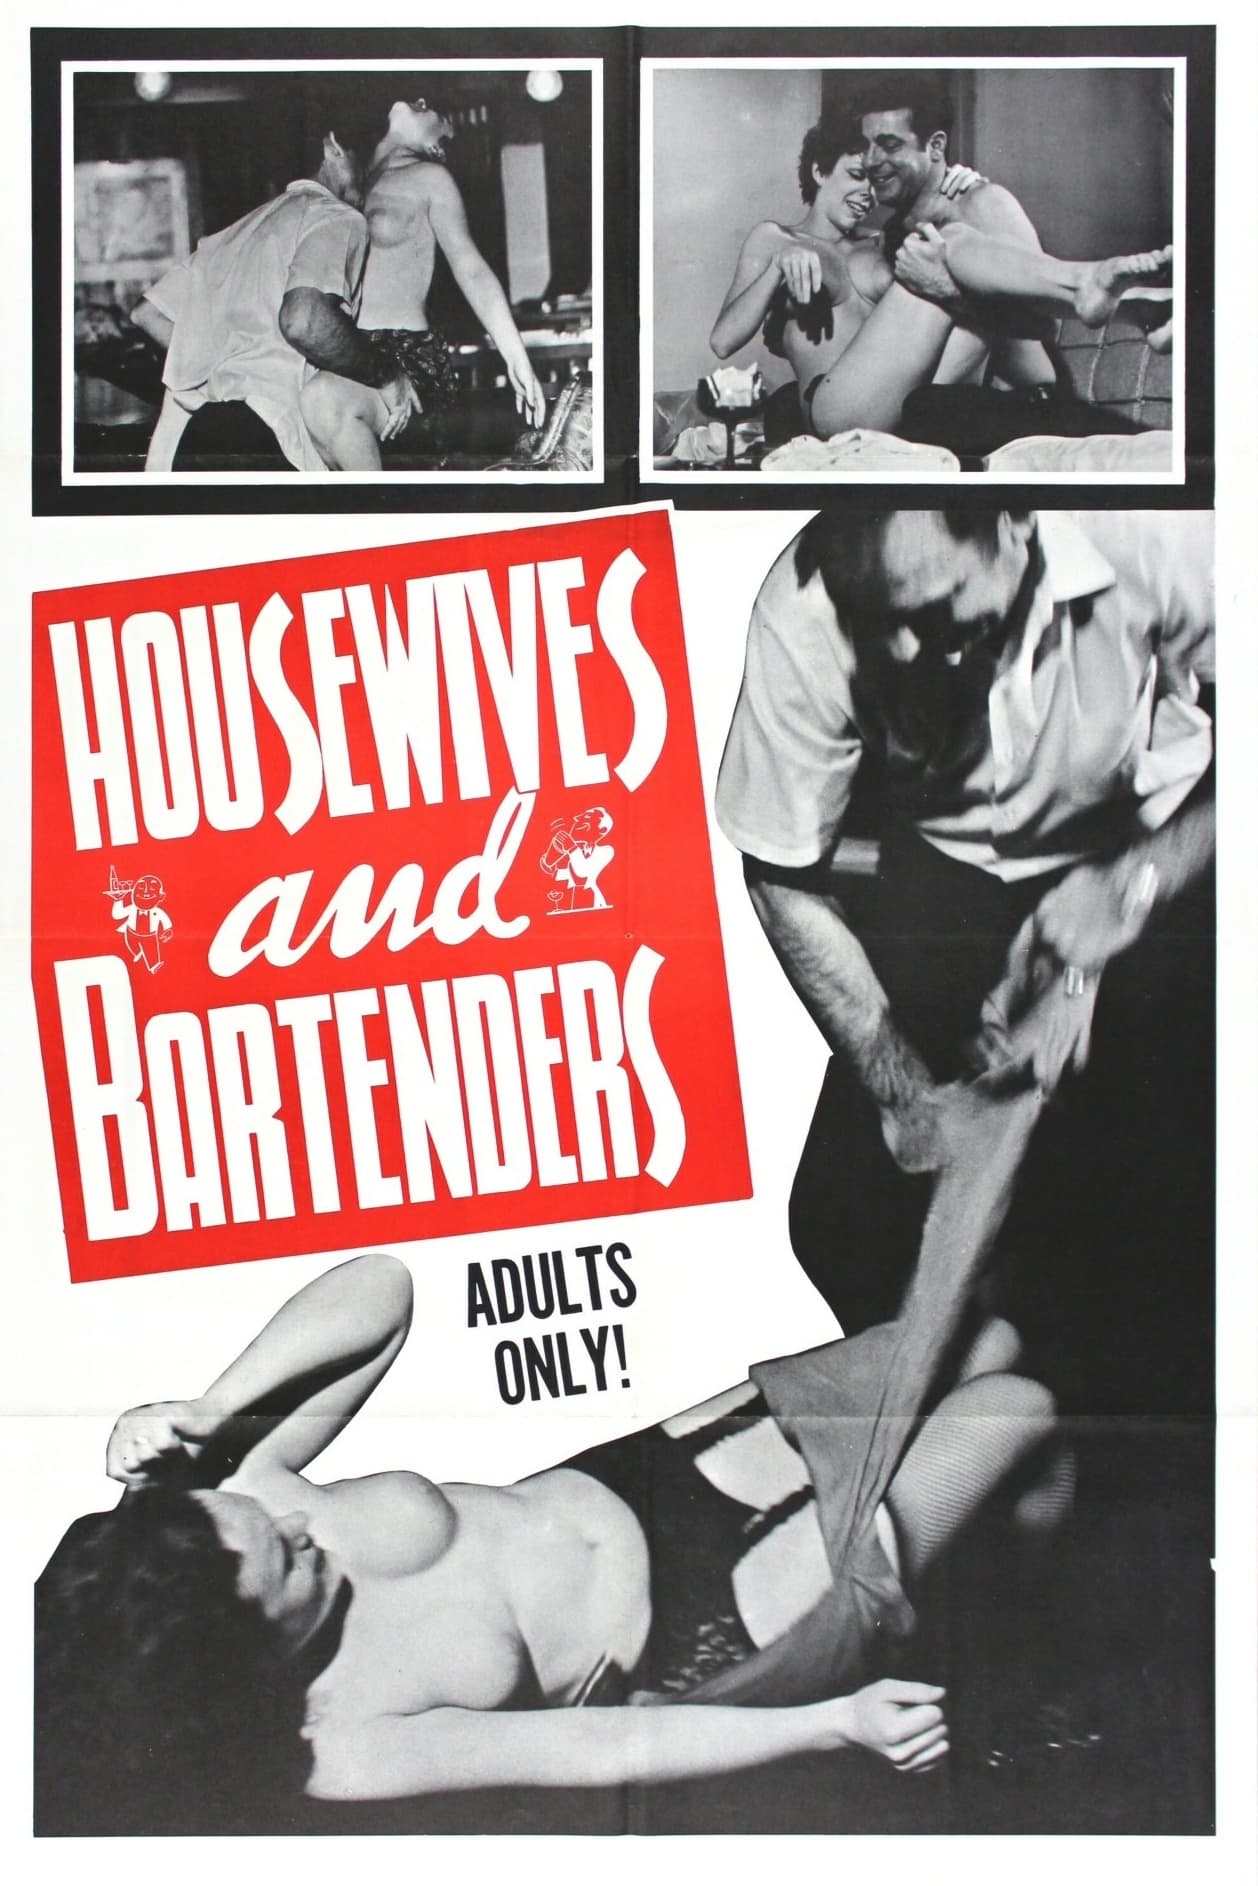 Housewives and Bartenders